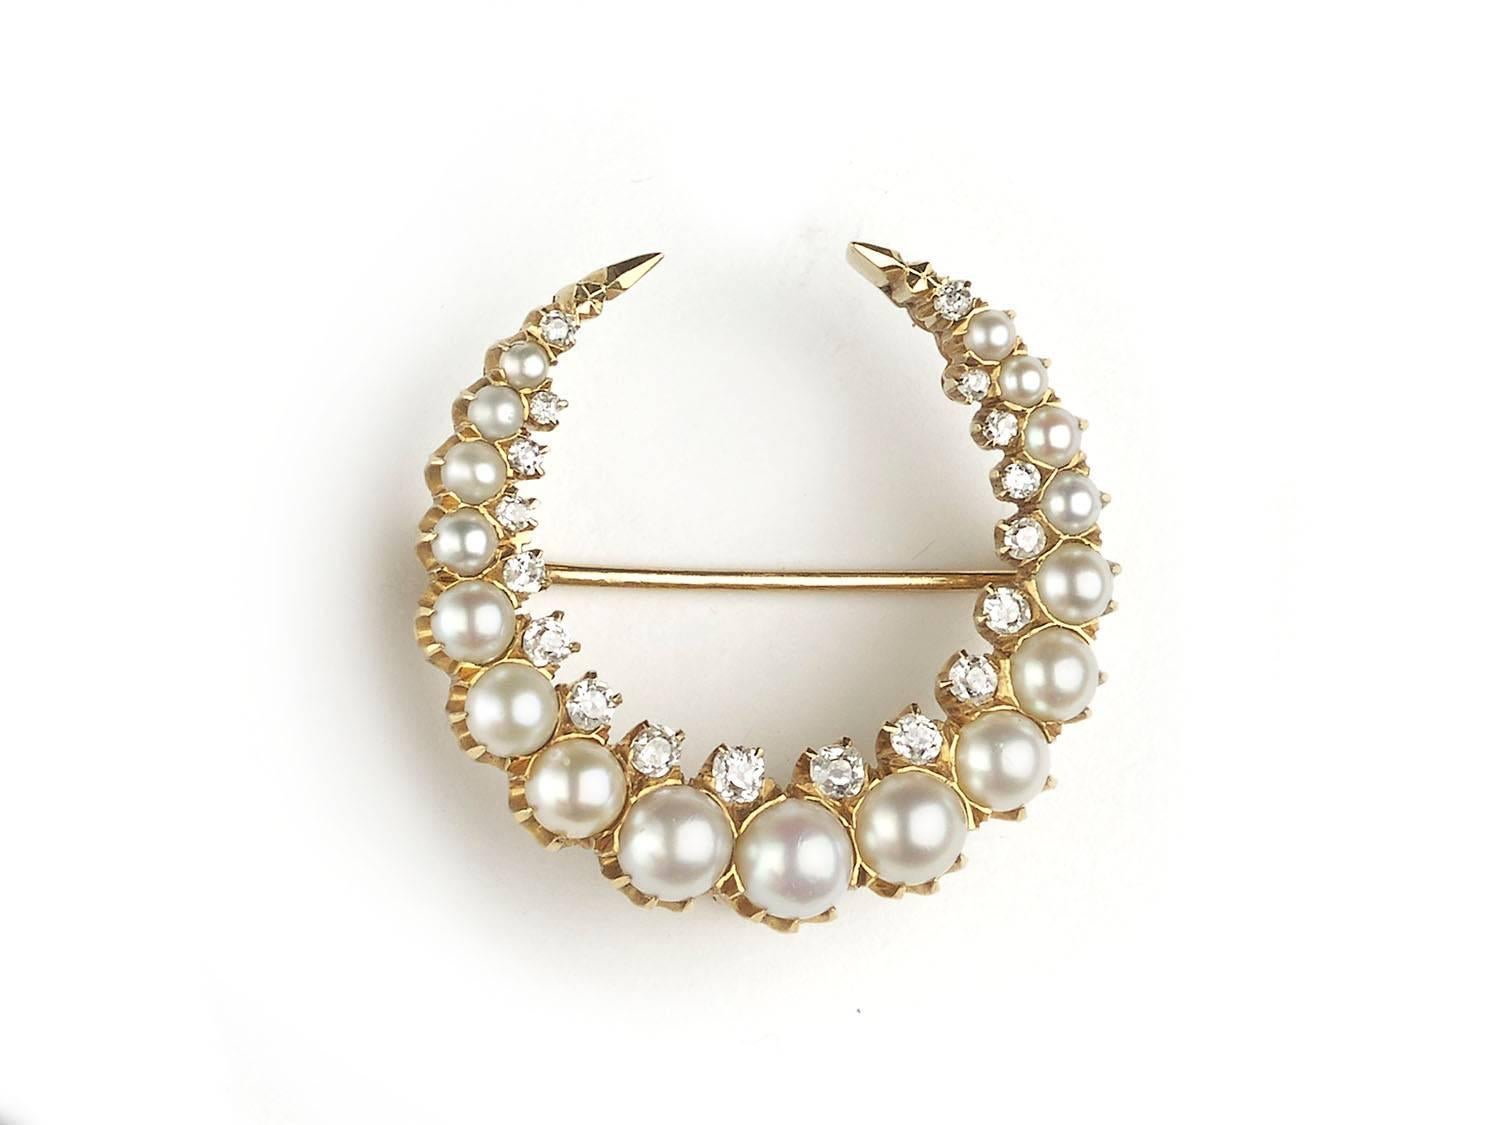 A pearl and diamond crescent, set with seventeen graduated pearls and old cut diamonds, mounted in 14ct gold, with interchangable brooch and pendant fittings, makers mark C & Co and numbered 5846